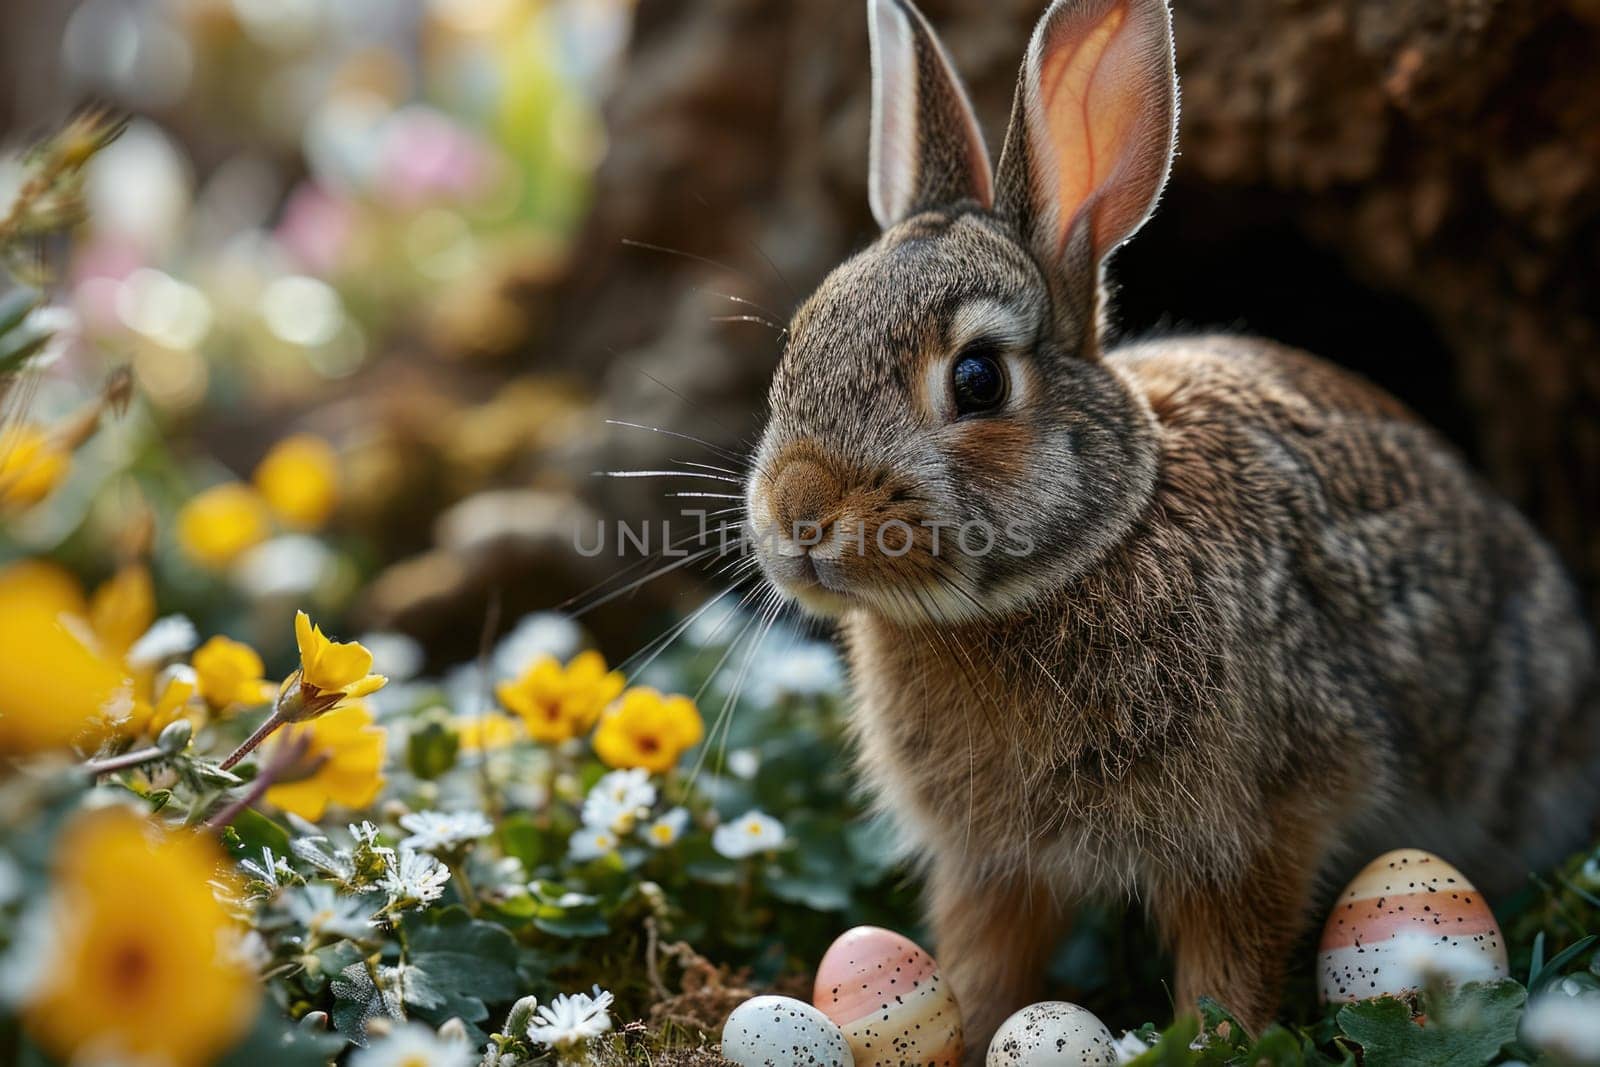 Spring Forest: Rabbit, Easter Eggs and Bright Spring Flowers by Yurich32